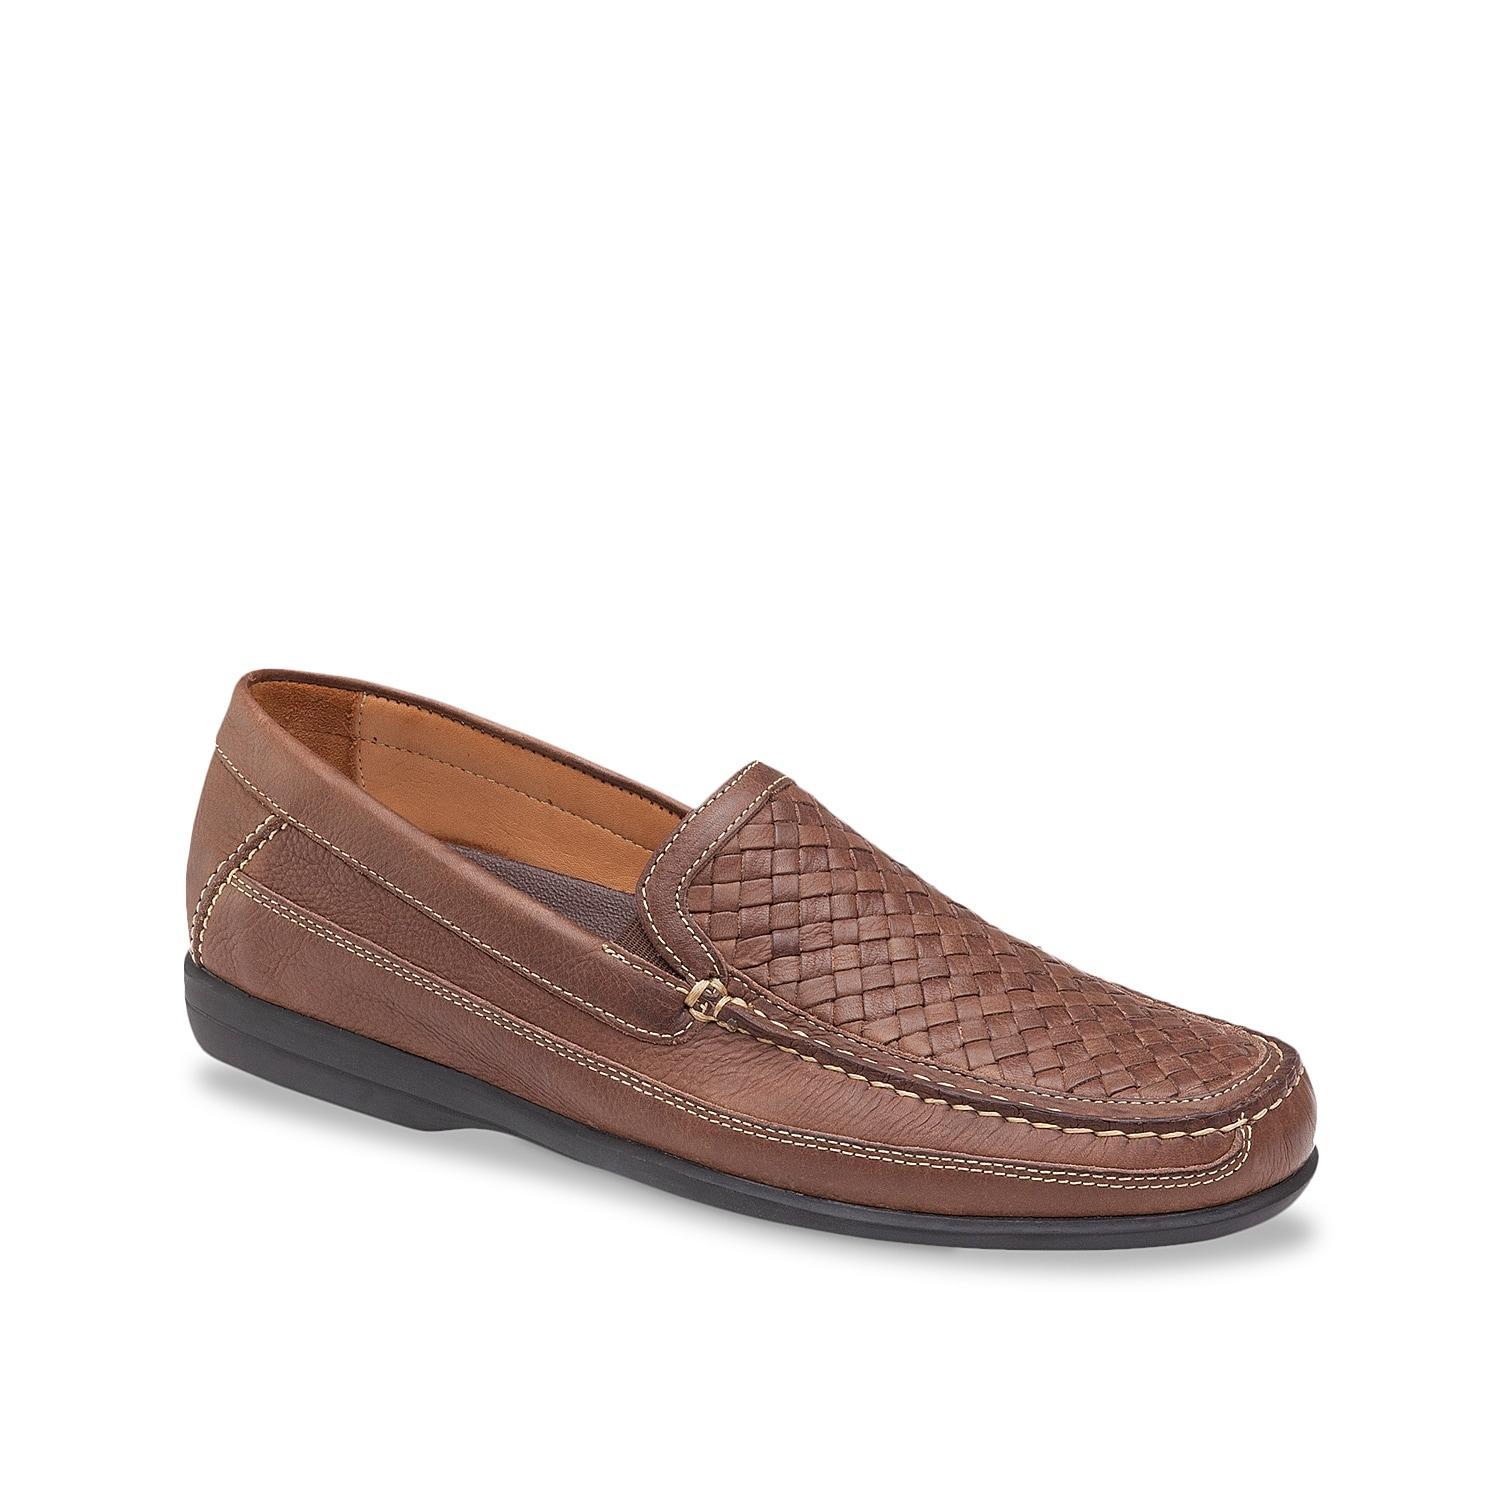 Johnston  Murphy Mens Locklin Woven Venetian Leather Loafers Product Image